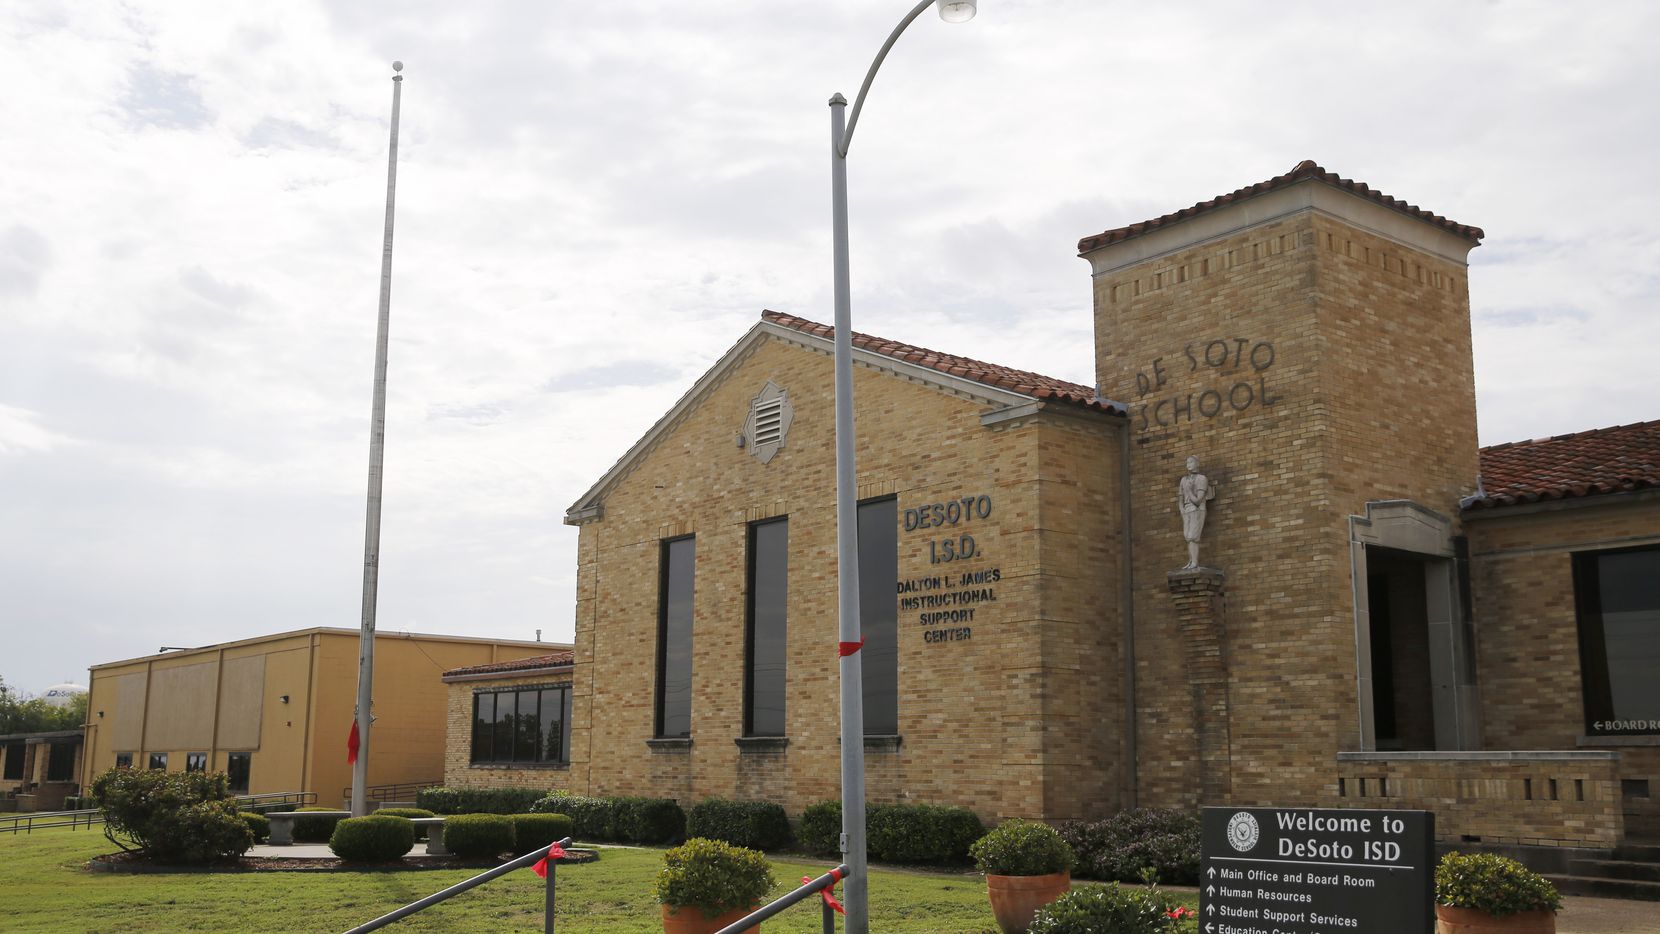 DeSoto ISD administration building in DeSoto on Sept. 5, 2020.